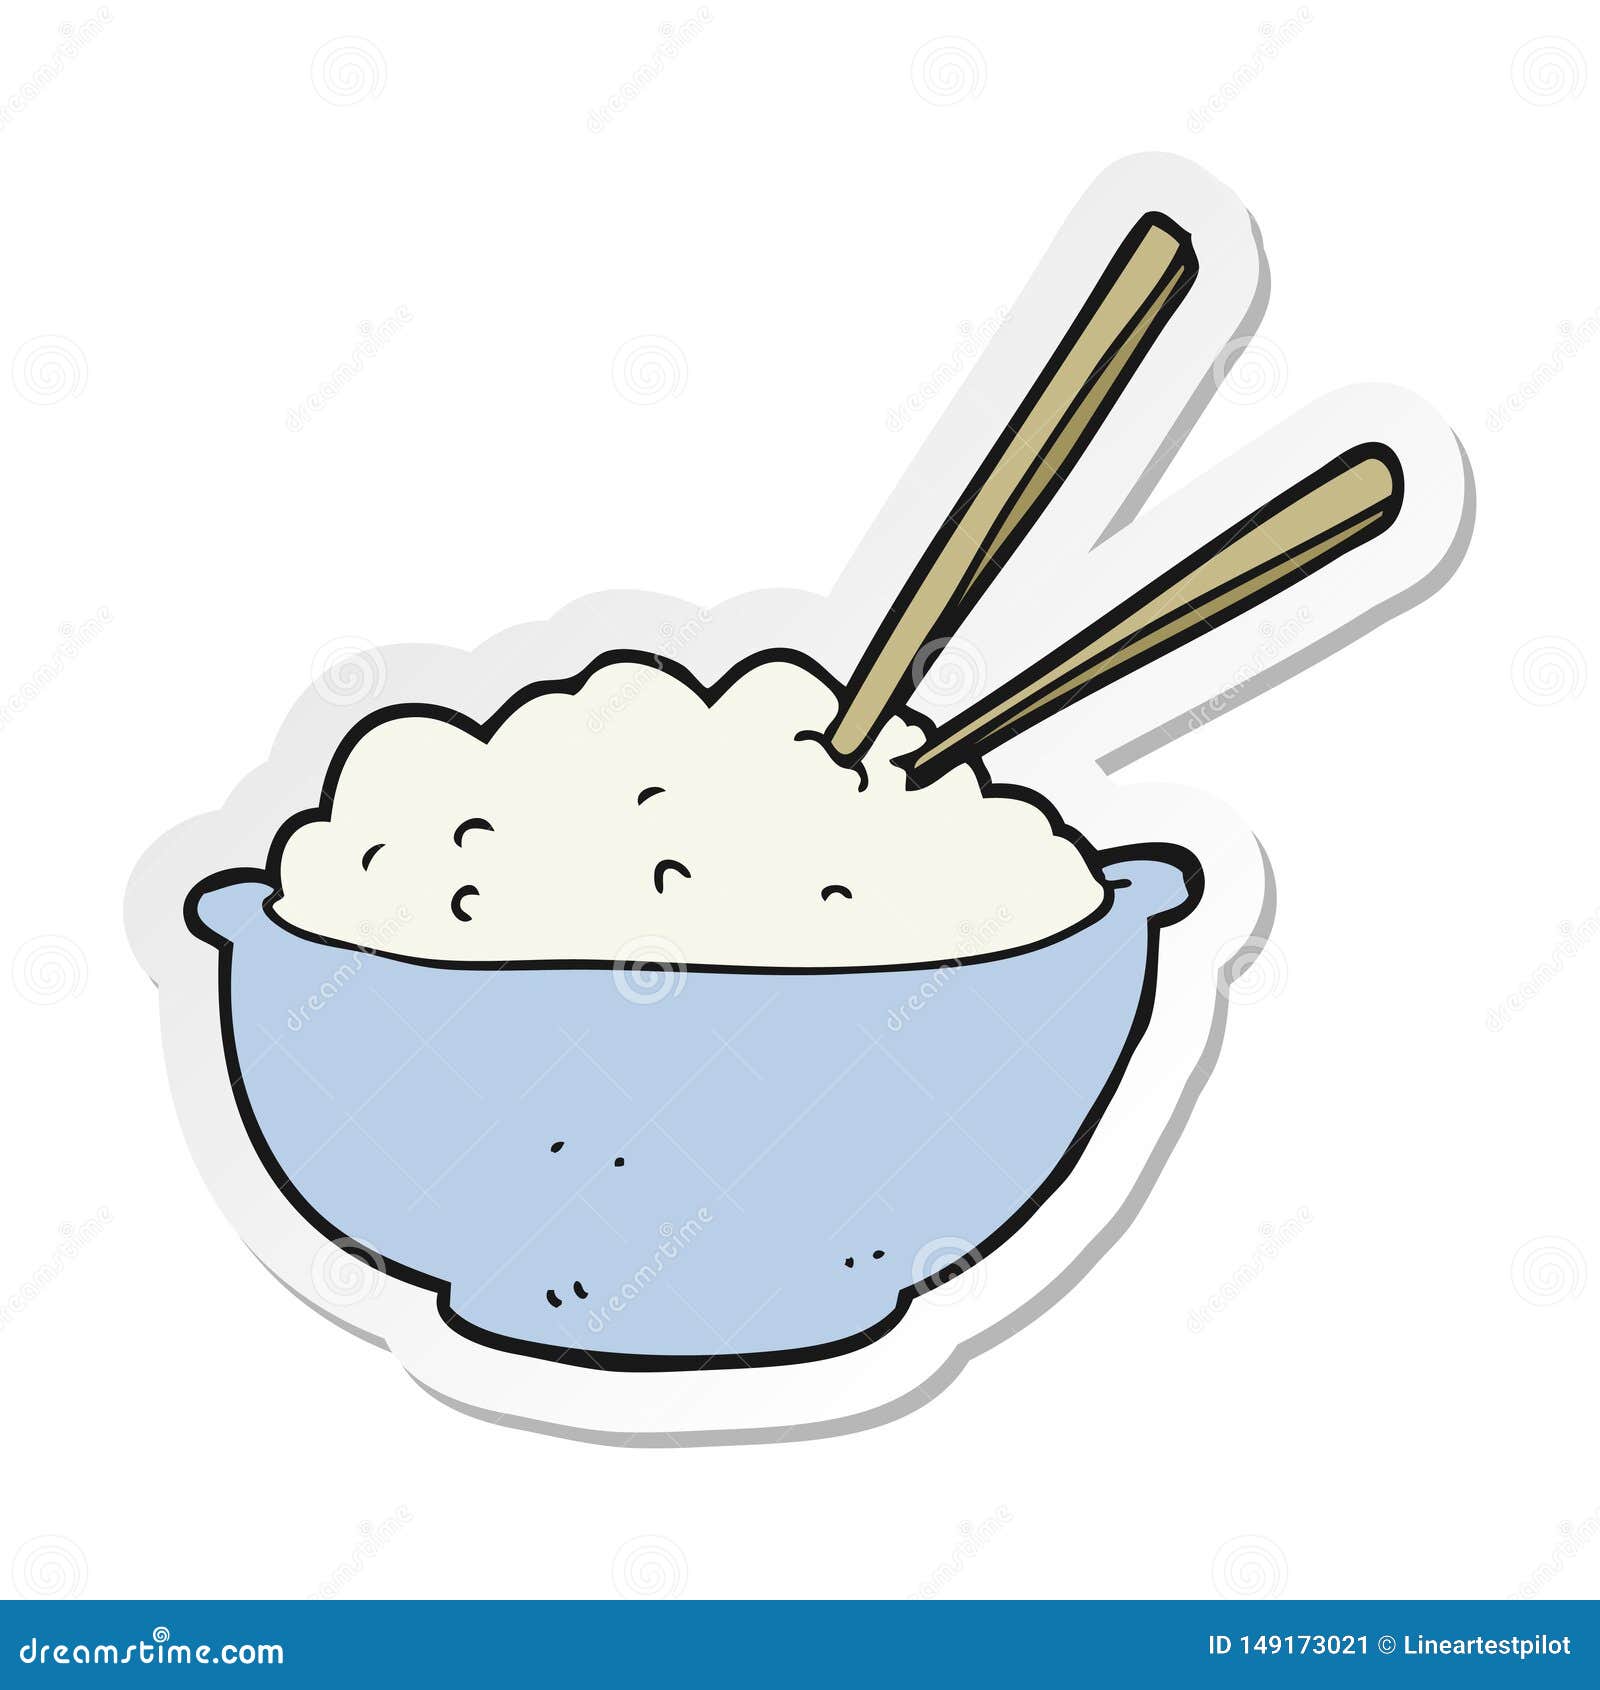 Sticker of a Cartoon Bowl of Rice Stock Vector - Illustration of sticker,  sign: 149173021